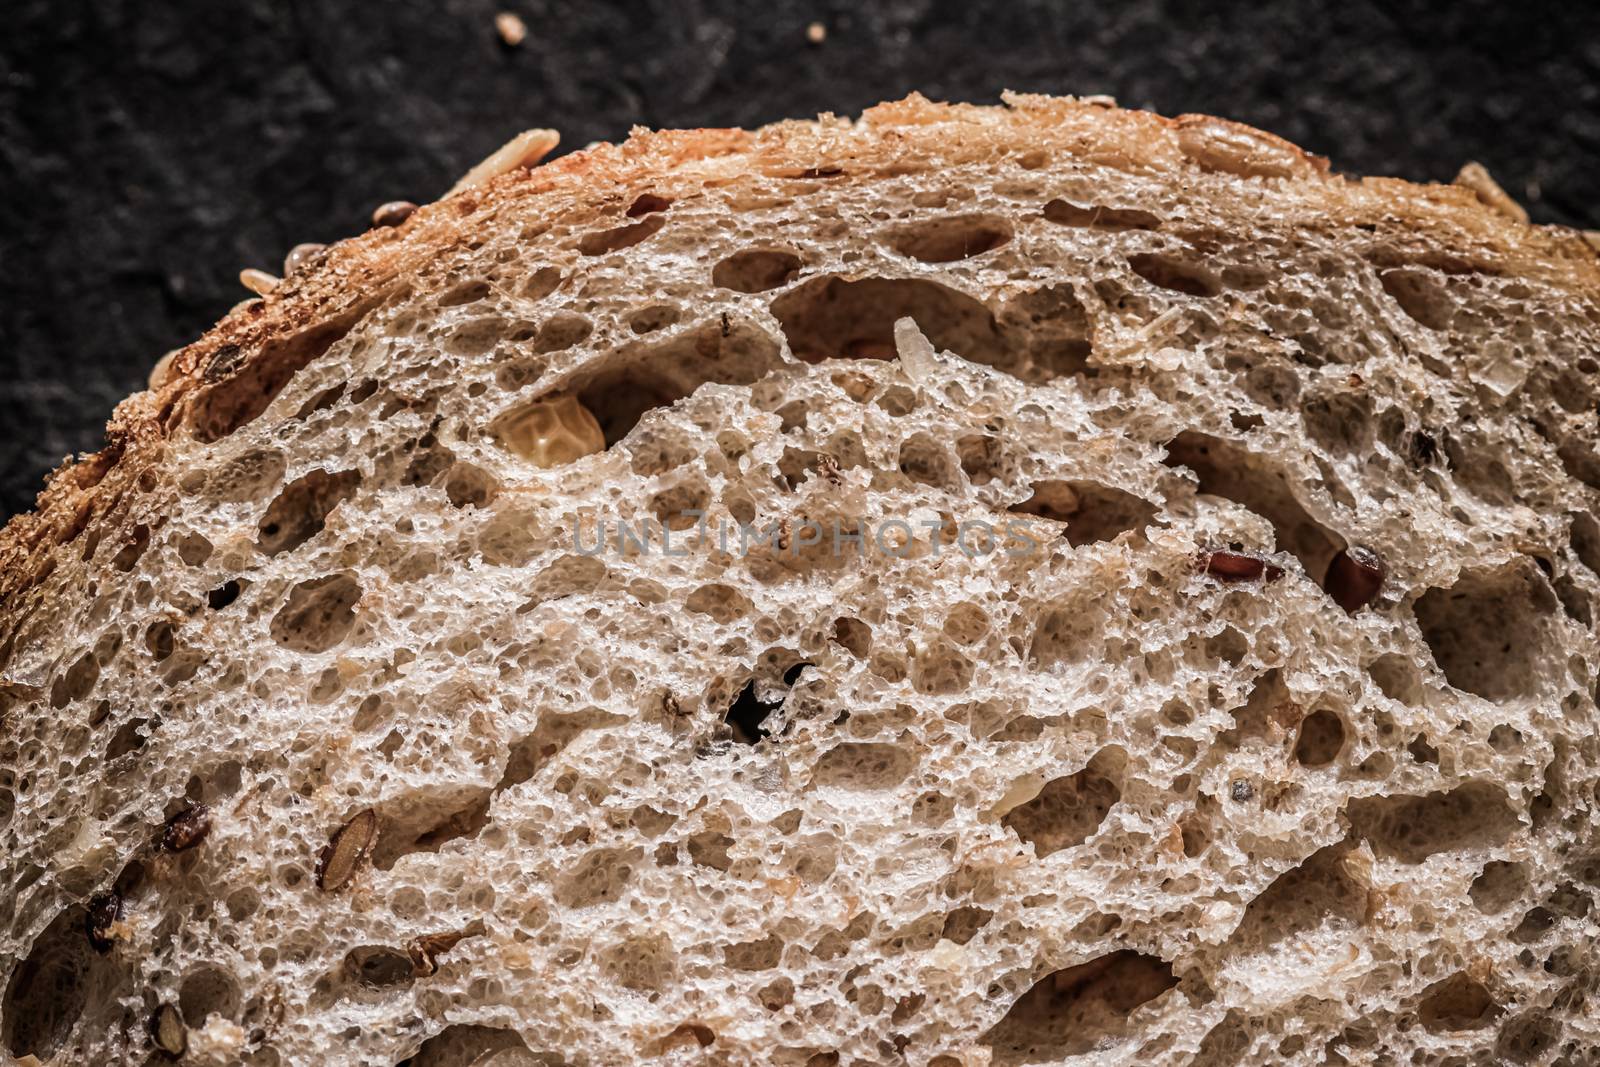 Fresh whole grain seeded bread, organic wheat flour, closeup slice texture as background for food blog or cook book recipe by Anneleven